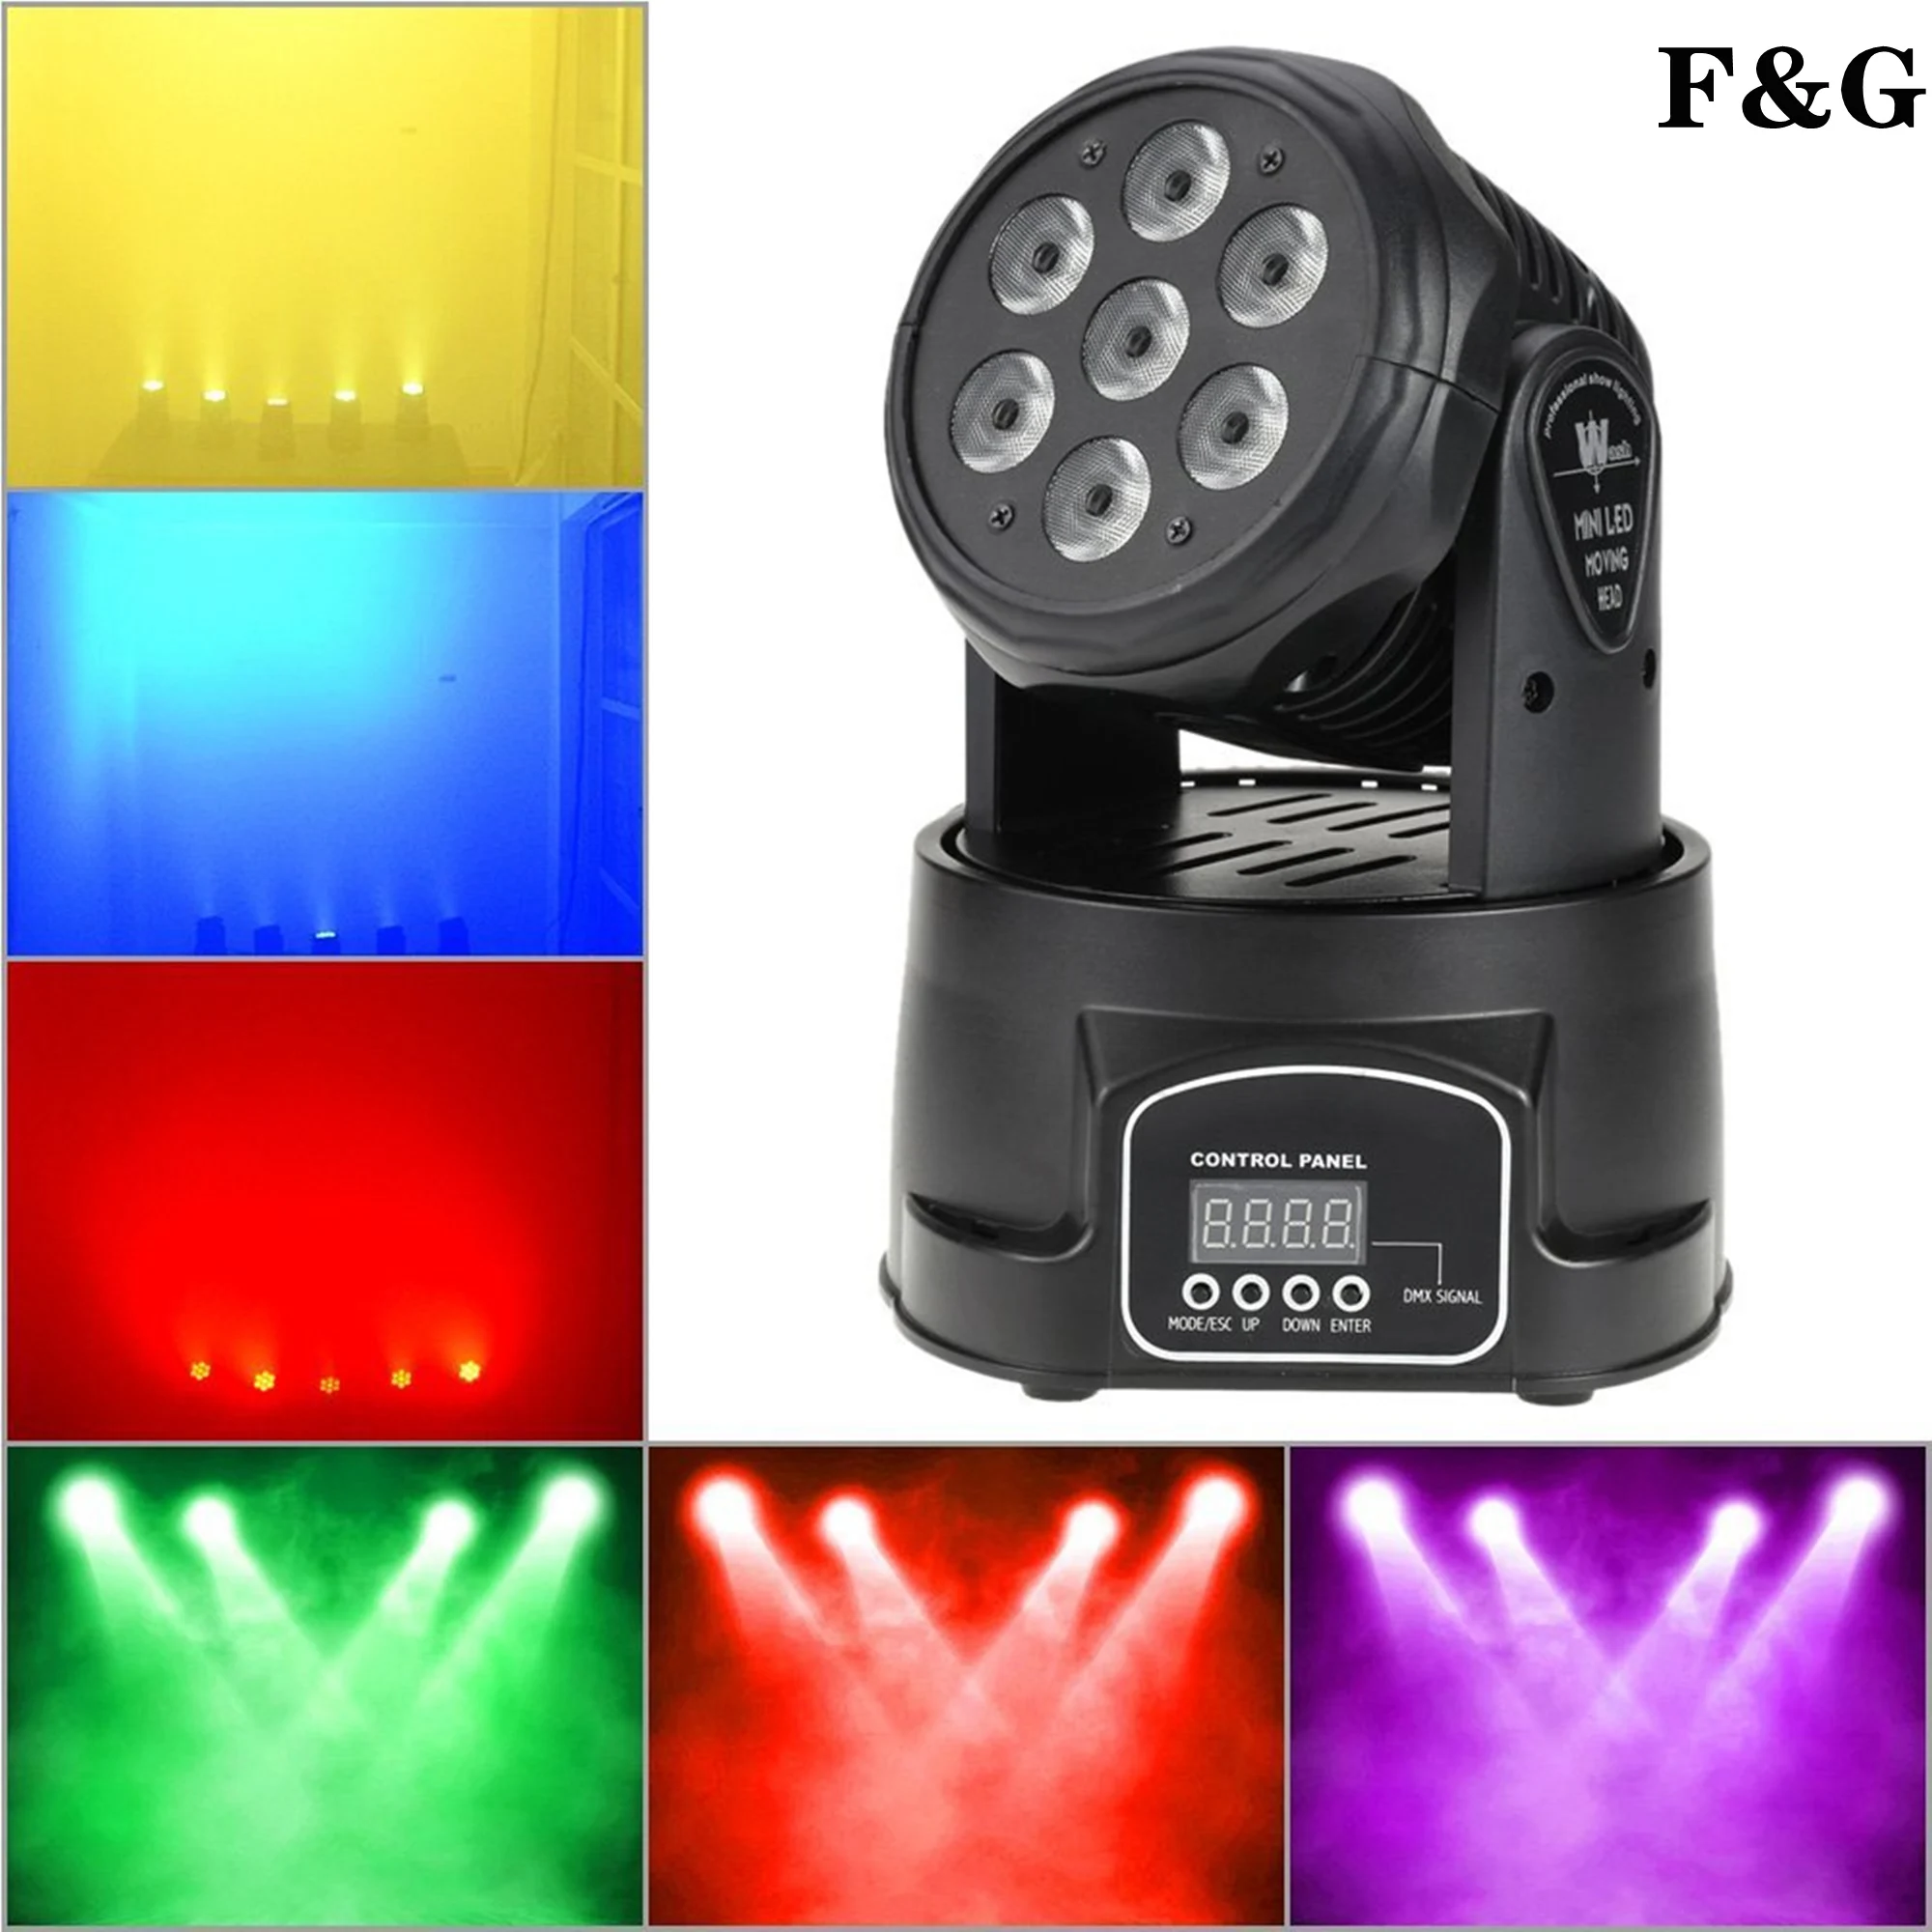 Factory outlet LED 7x18W Moving Head light 6IN1 RGBWA+UV Professional for Effect stage for Disco DJ Music Party Club Dance